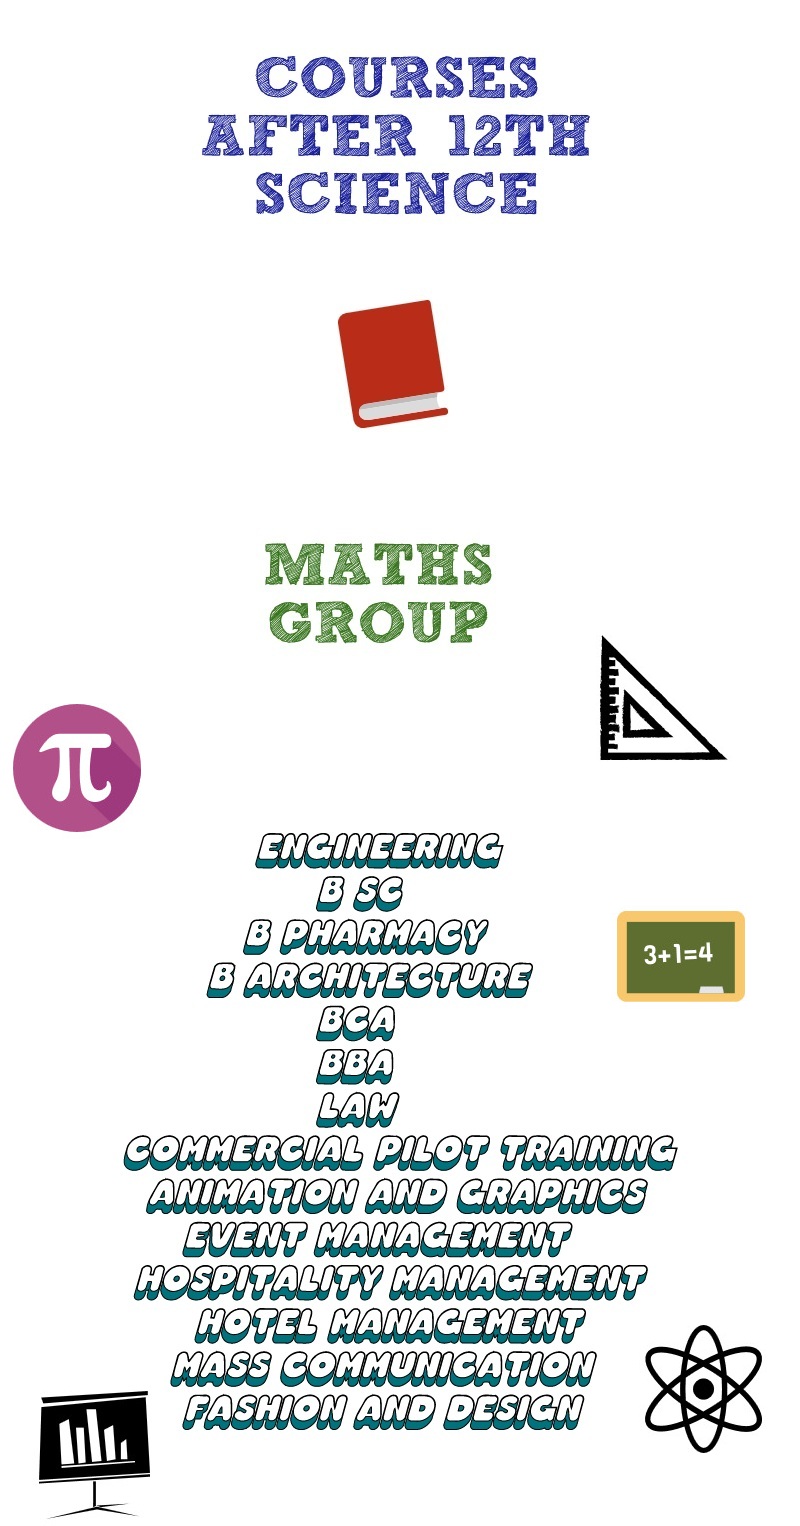 courses after 12th Science, Mathematics Group